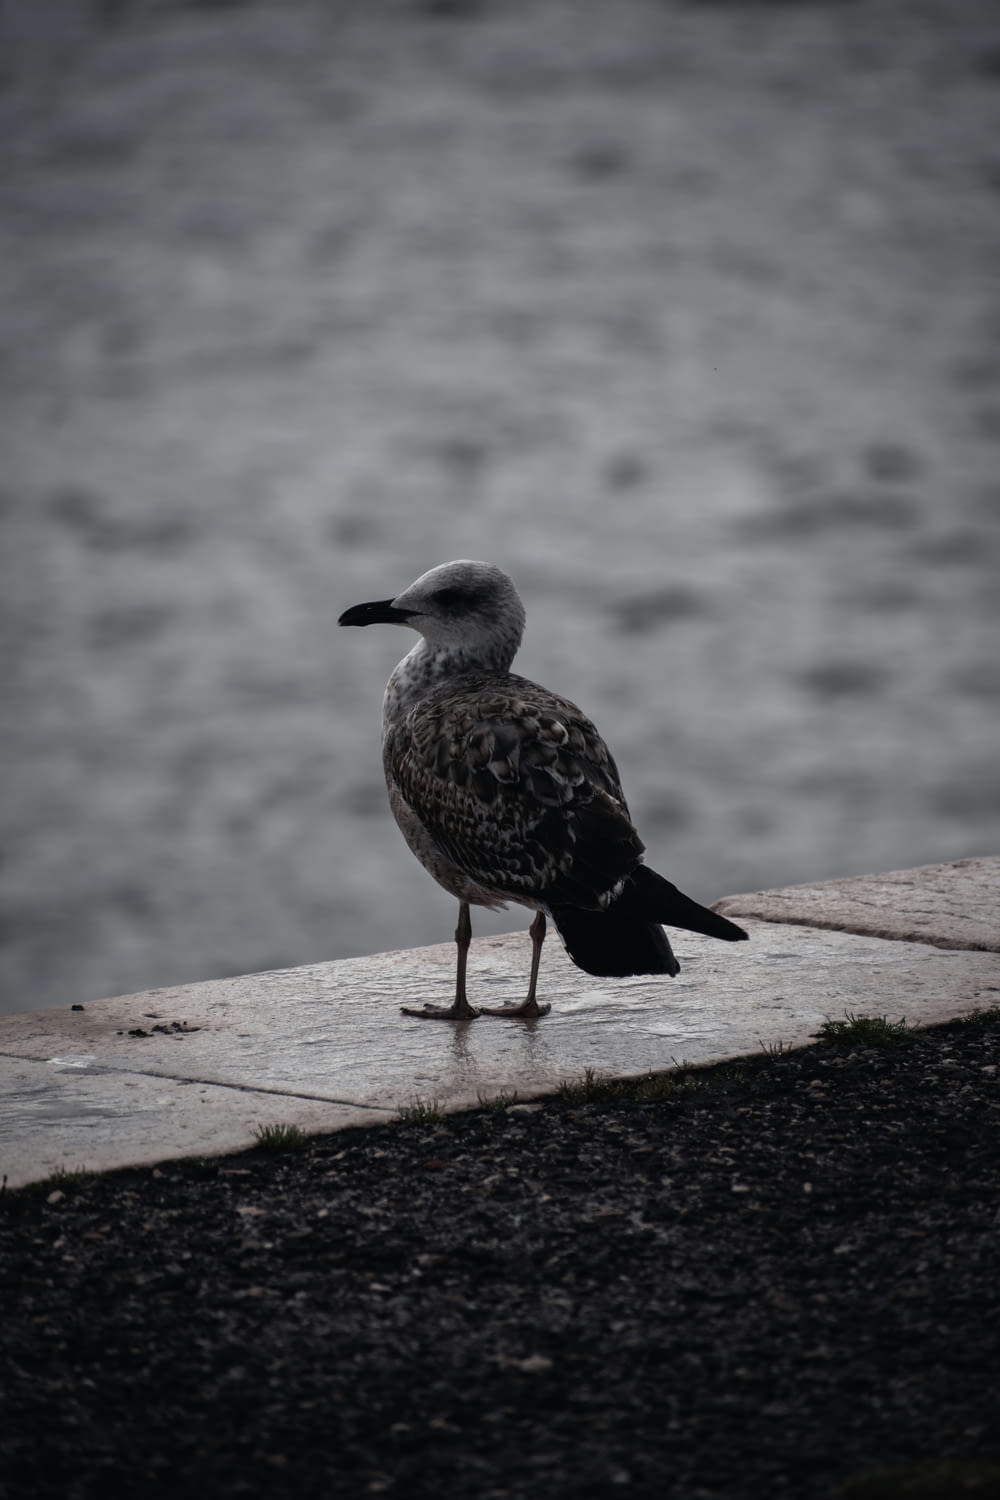 a seagull standing on a ledge near the water